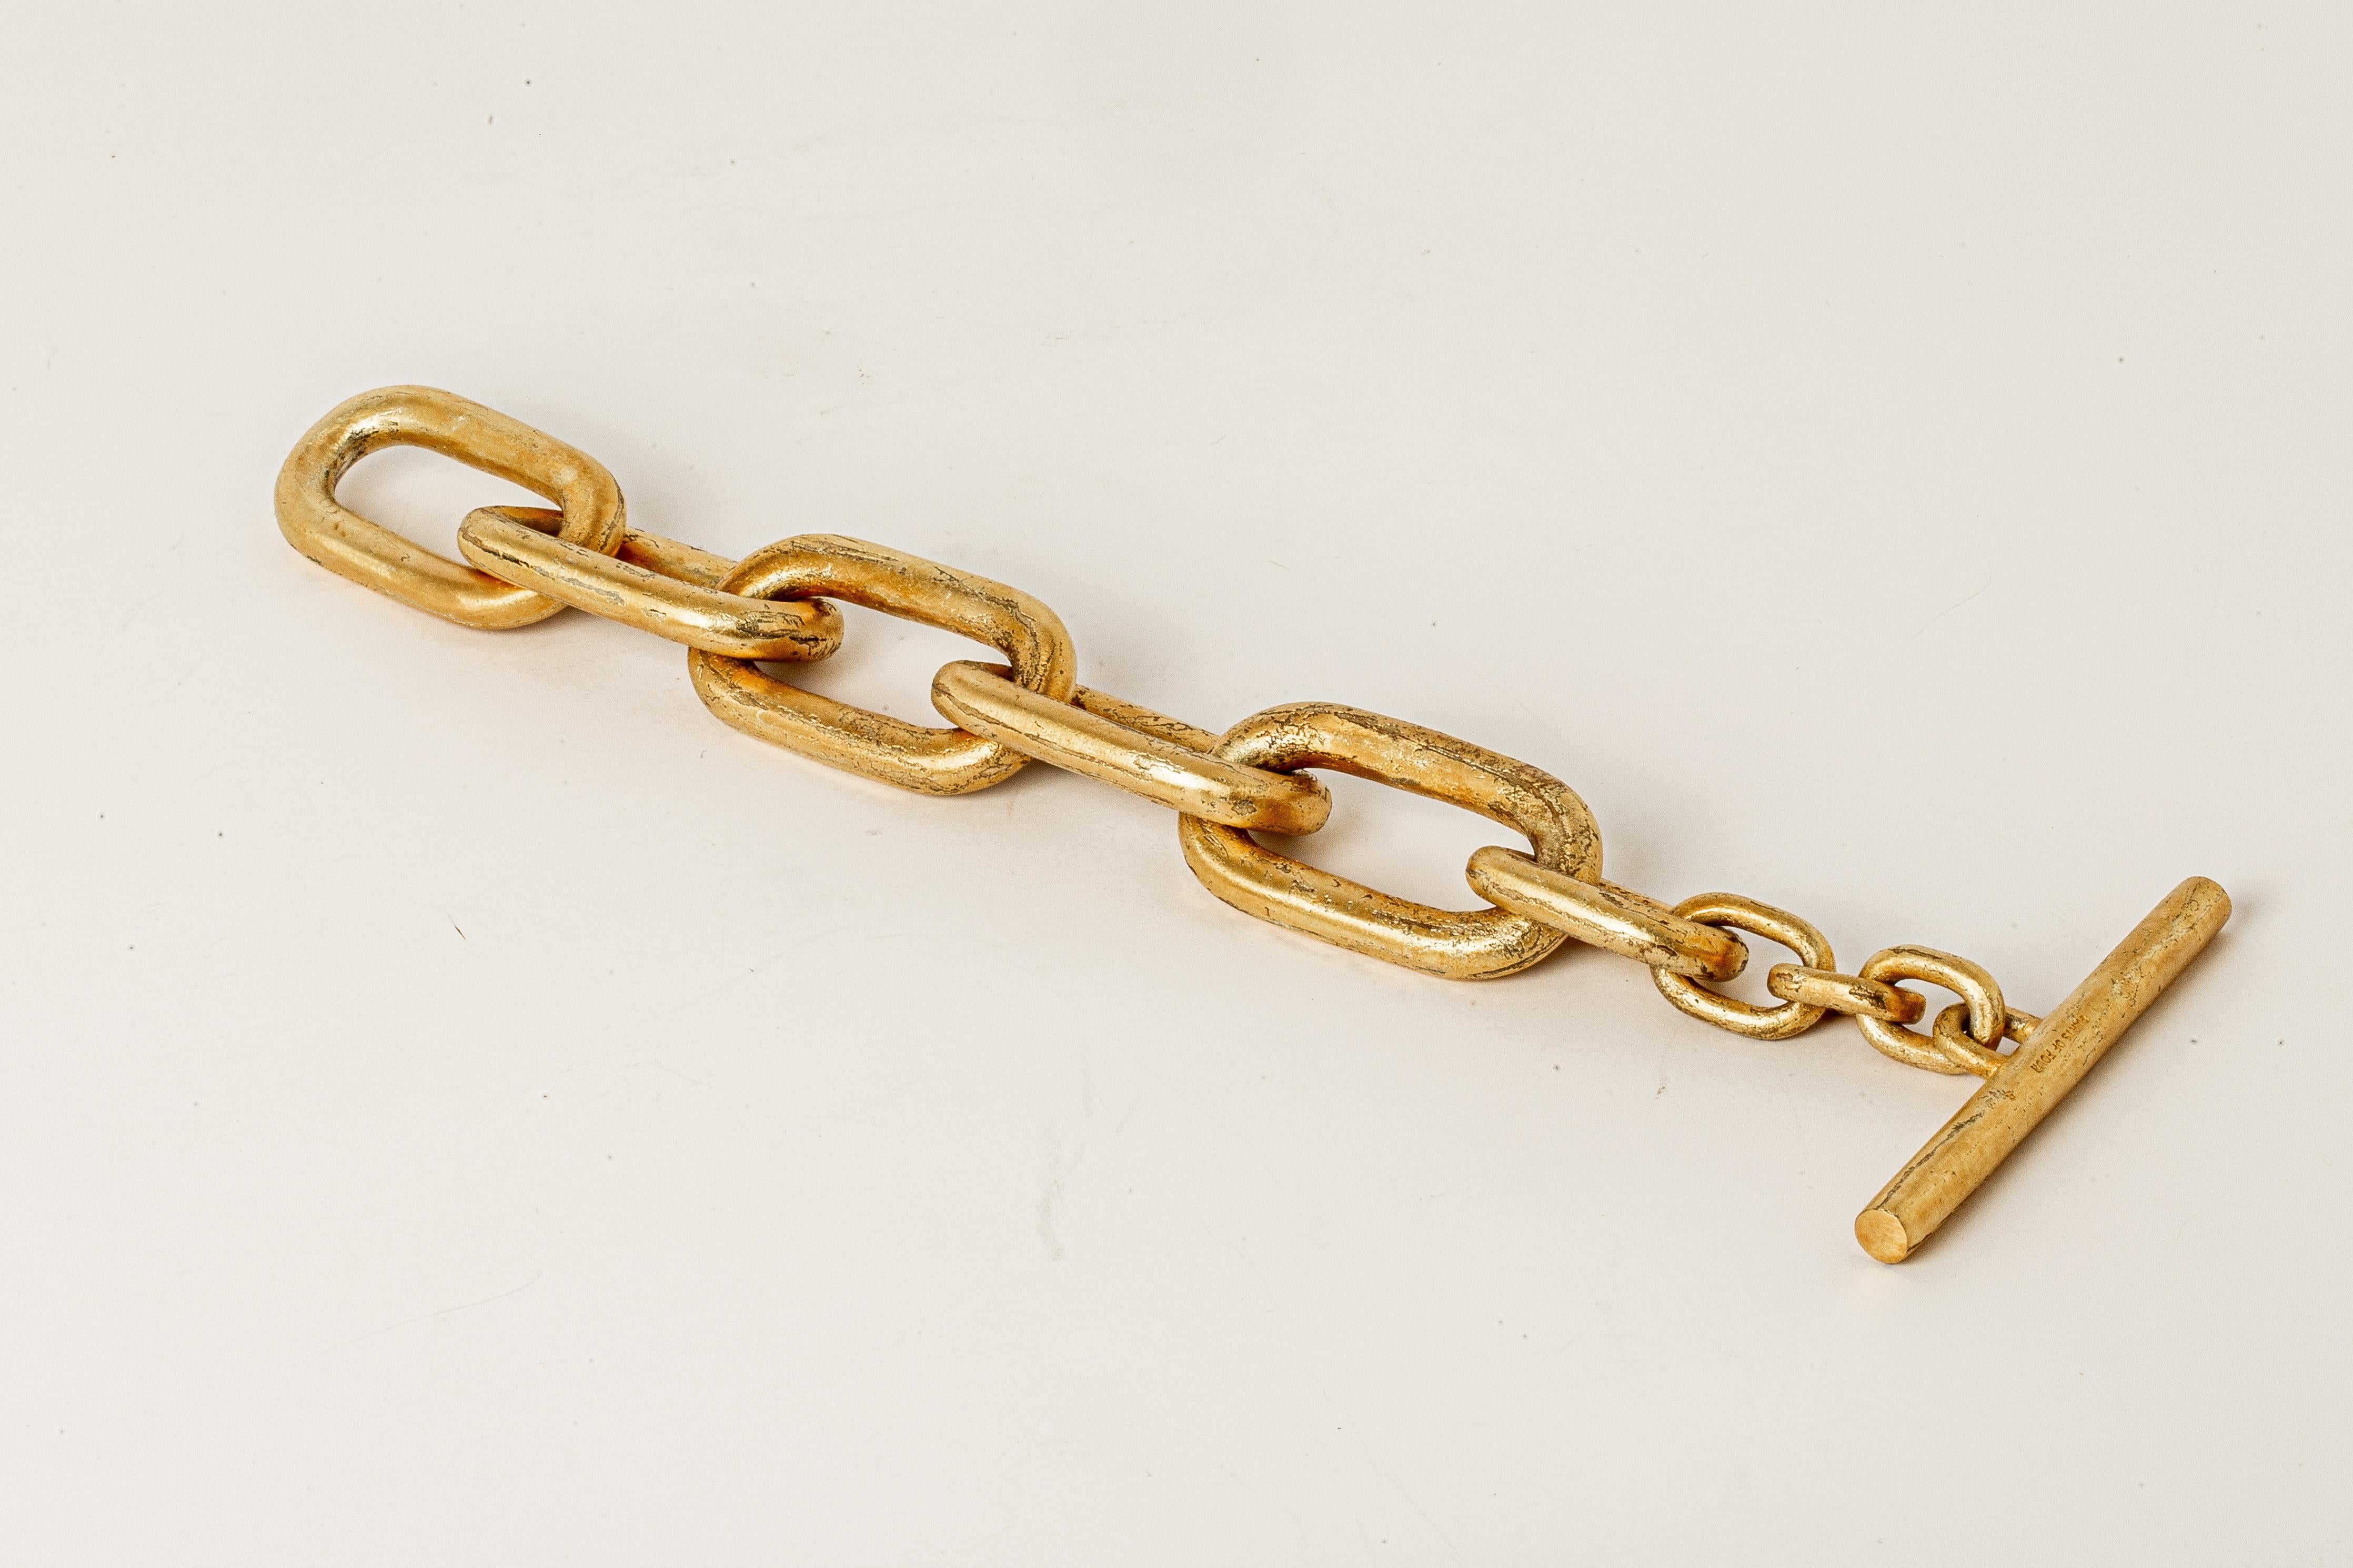 Chain bracelet in brass. rass substrate is electroplated with 18k gold and then dipped into acid to create the subtly destroyed surface.
Dimensions:
Chain link size (L × H): 50 mm × 25 mm
Toggle length: 70 mm